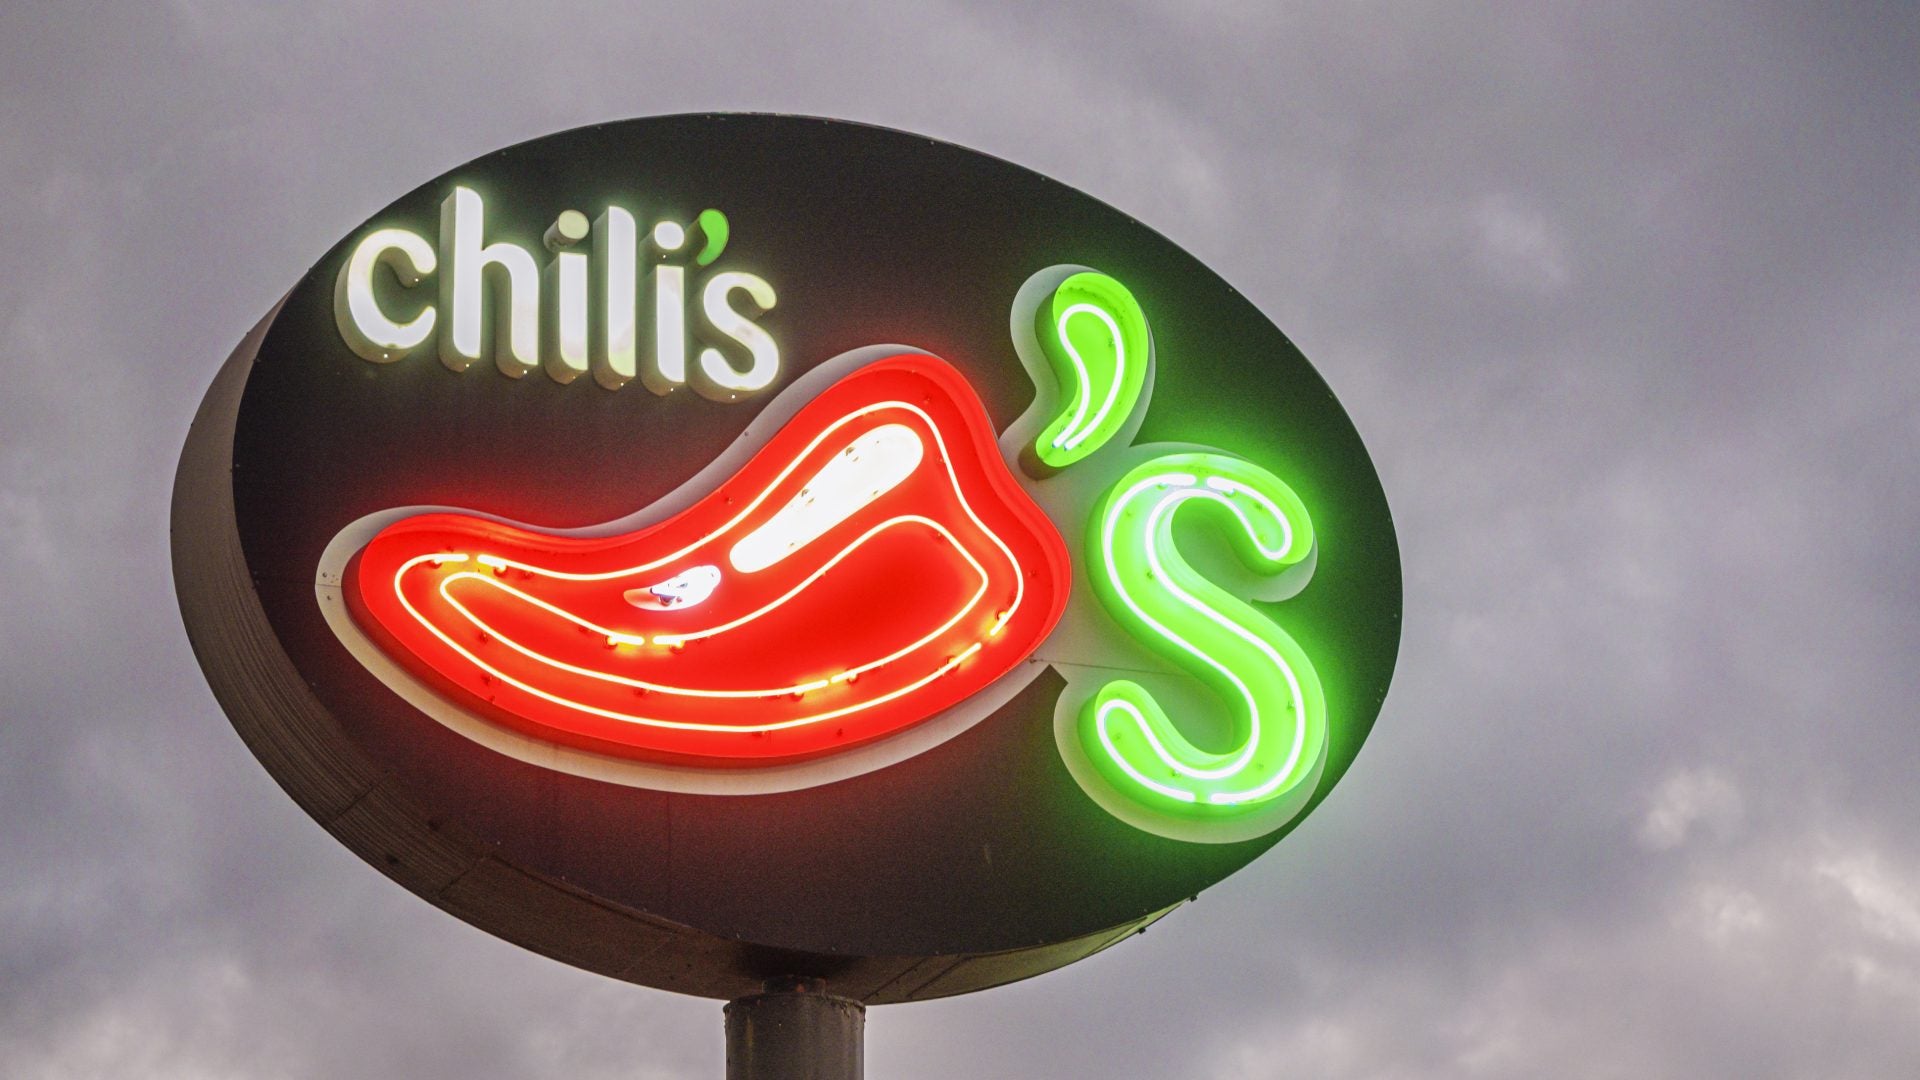 Black Family Suing Chili’s After Being Told They Had To Pay Before Being Served, Per Lawsuit